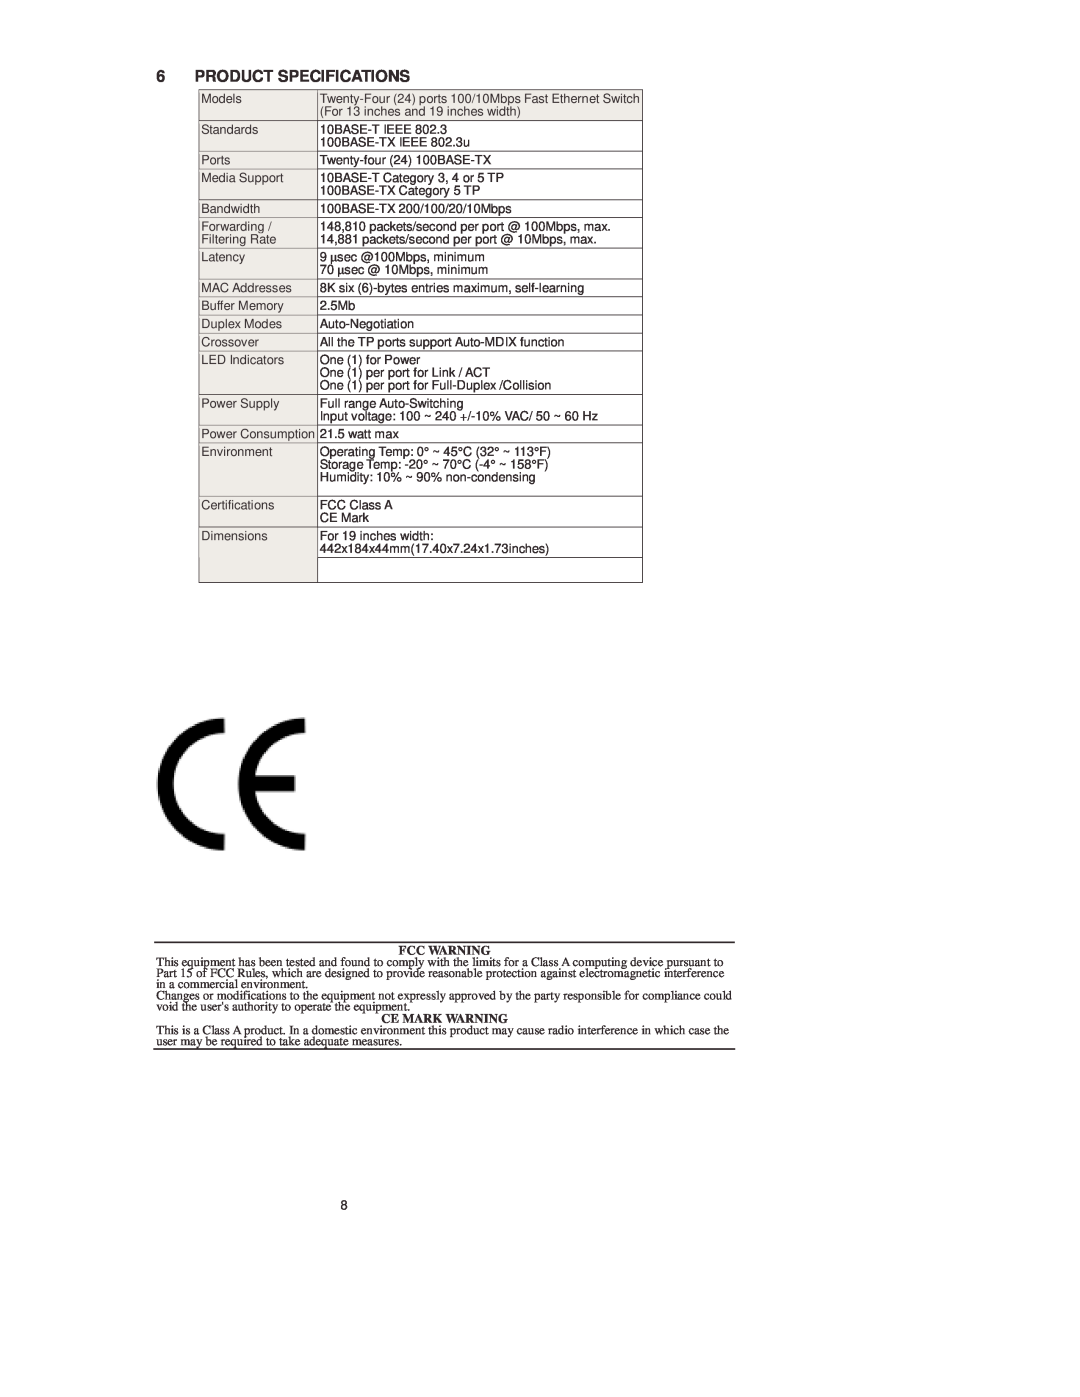 Lindy 25021 manual Product Specifications, Fcc Warning, Ce Mark Warning 